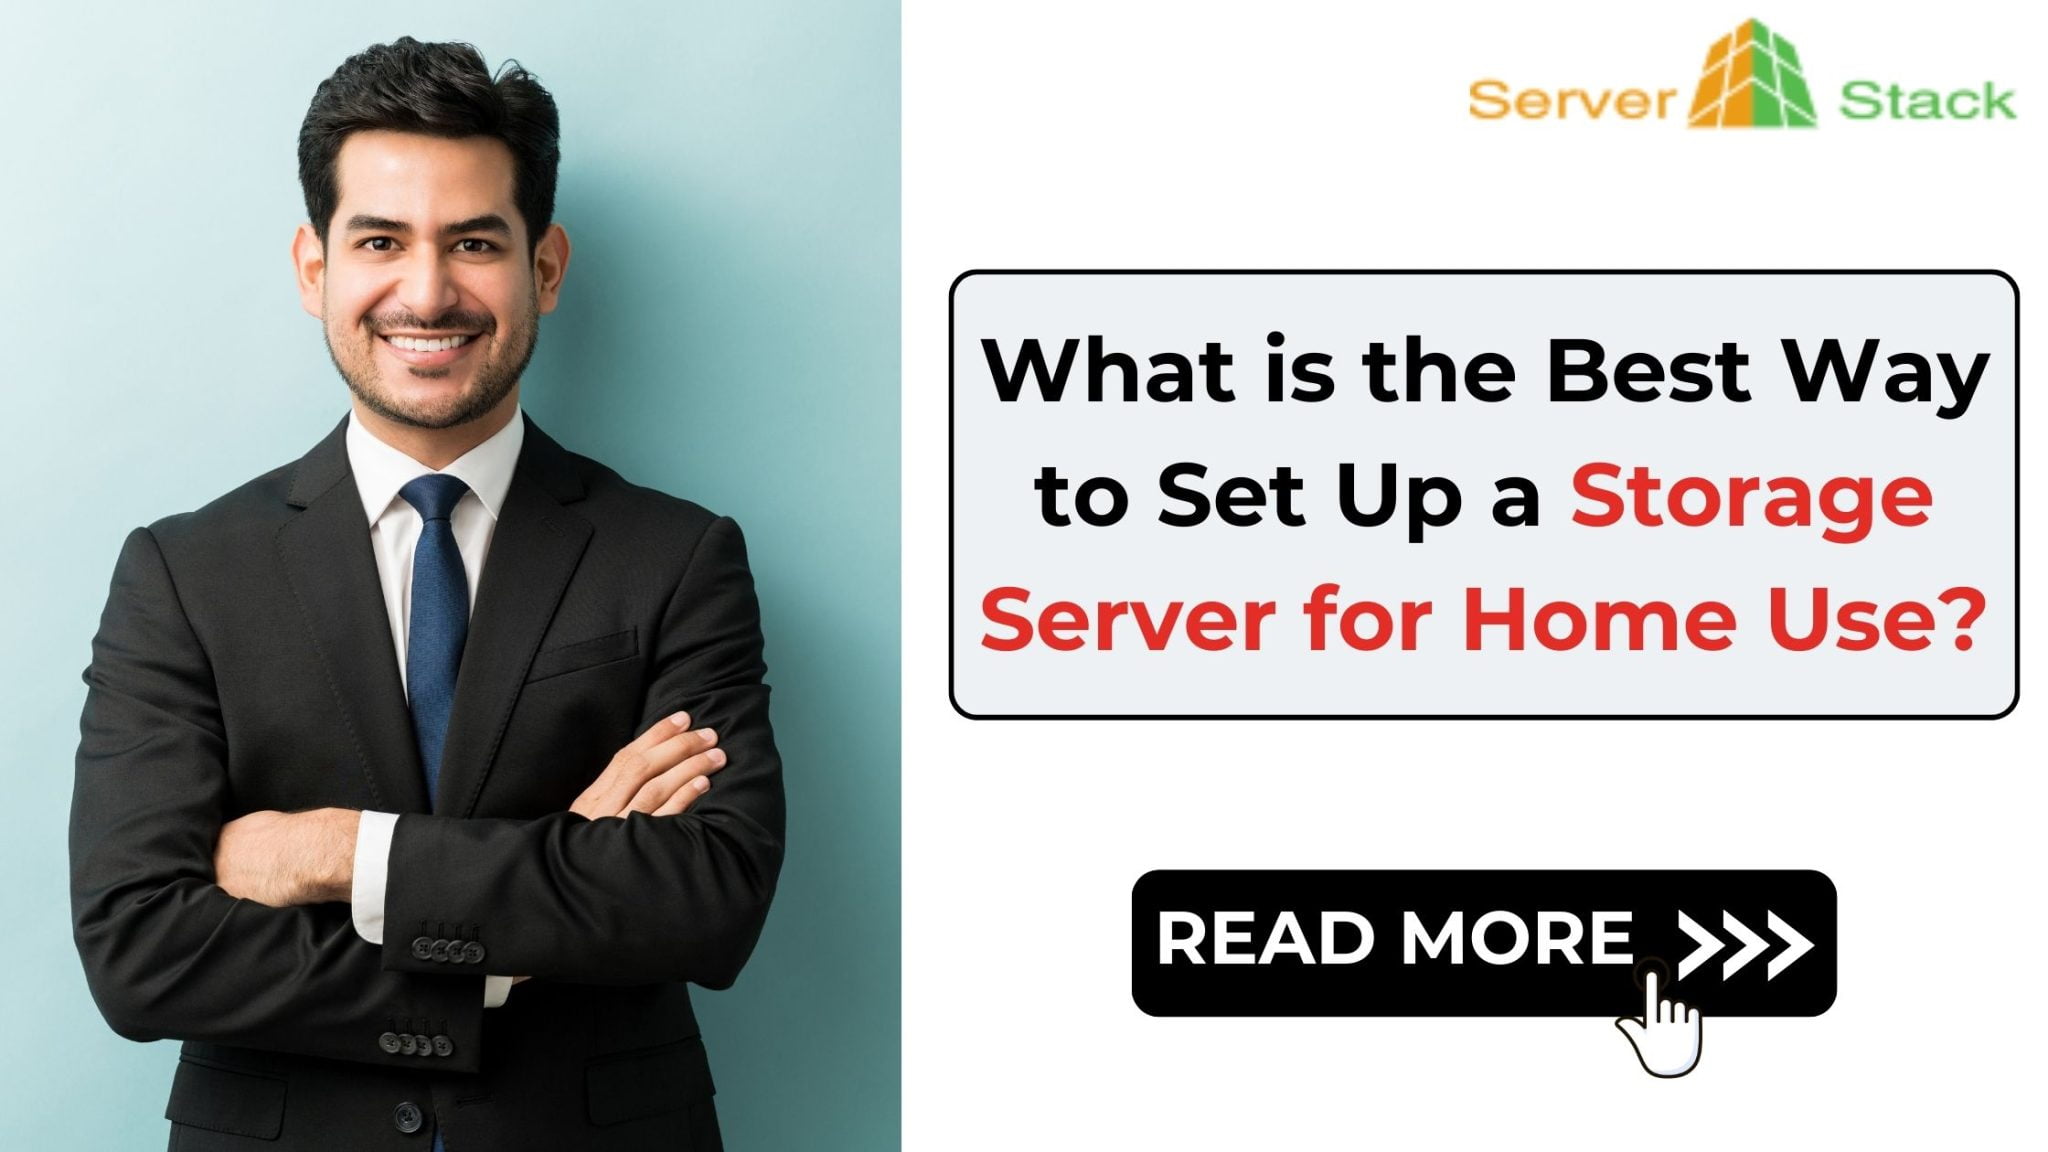 What is the Best Way to Set Up a Storage Server for Home Use?